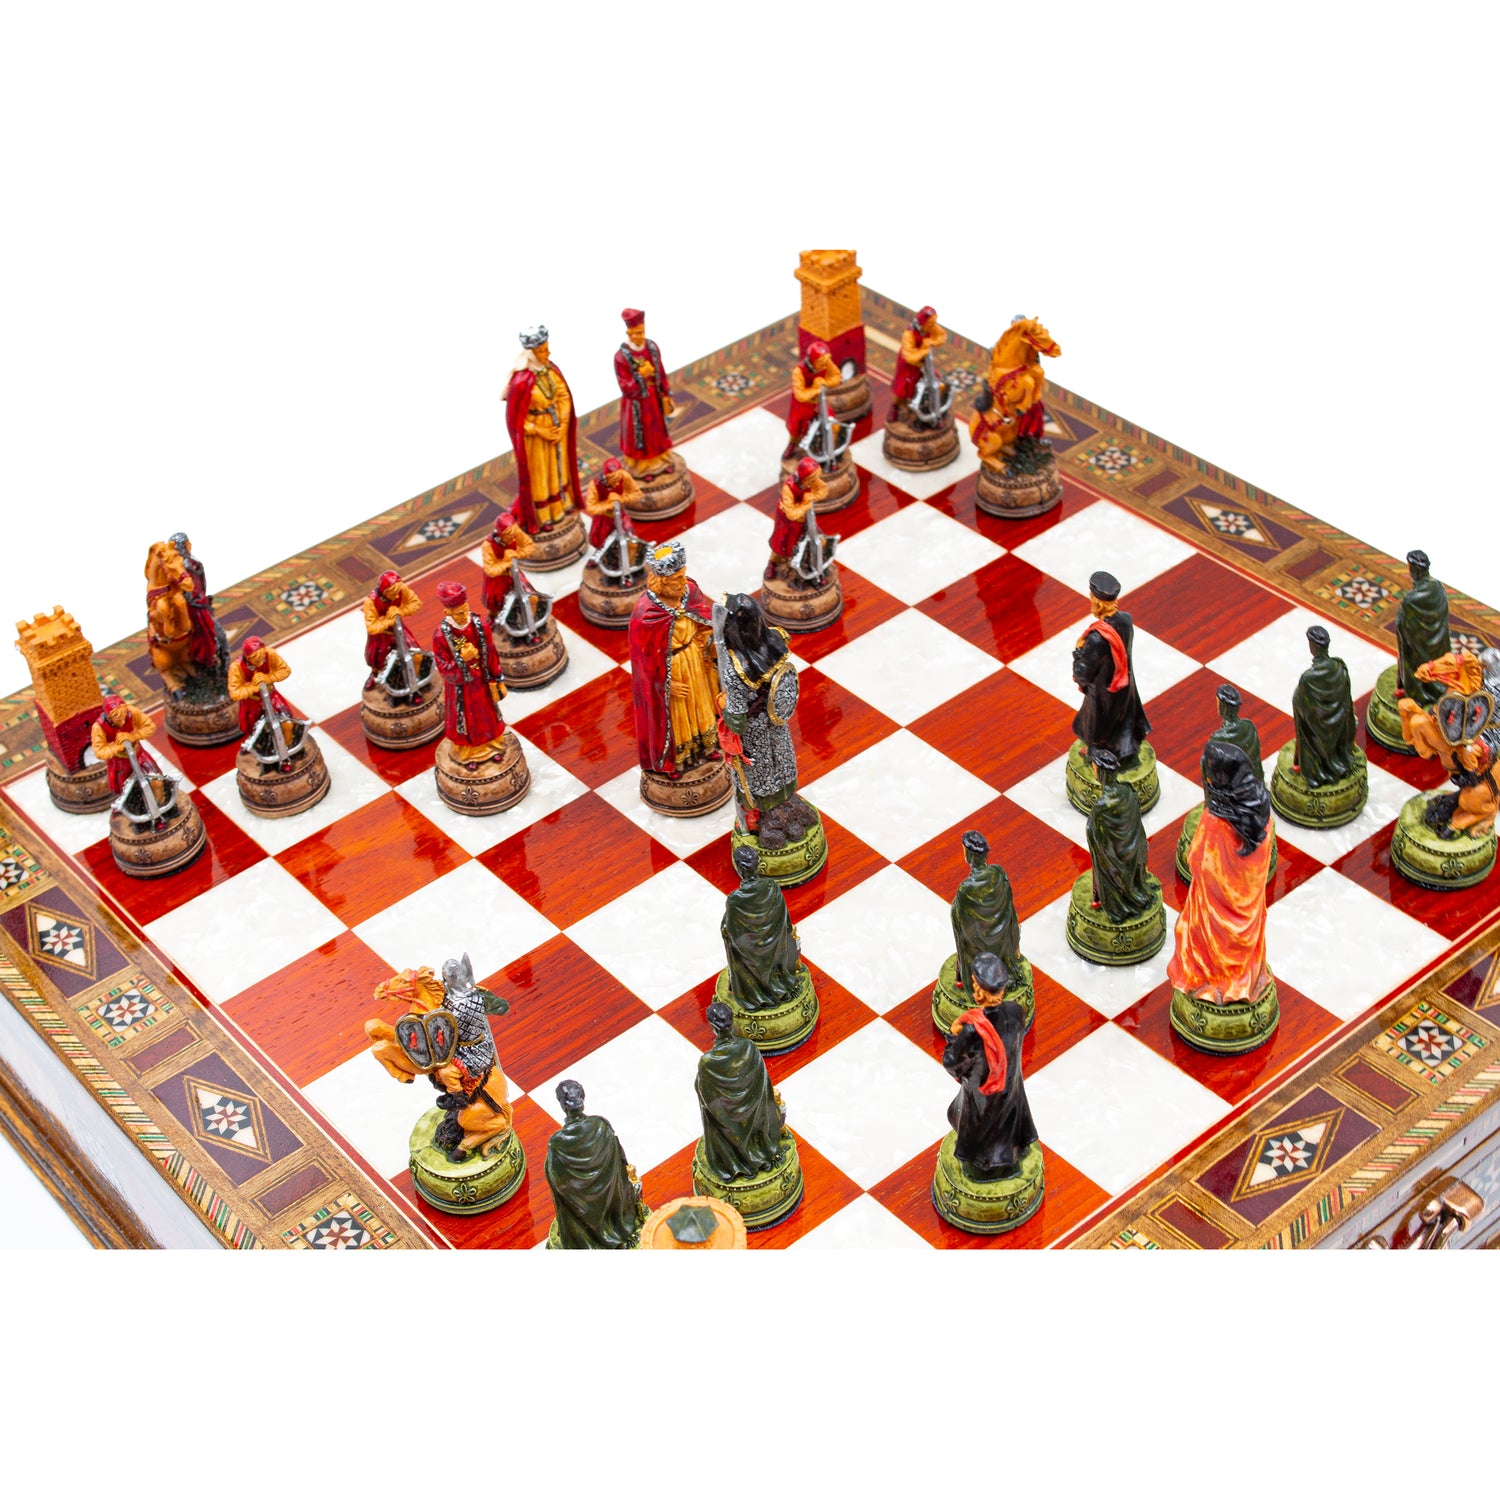 Camelot Splendor Chess Set: Hand-Painted with Drawer - Ketohandcraft